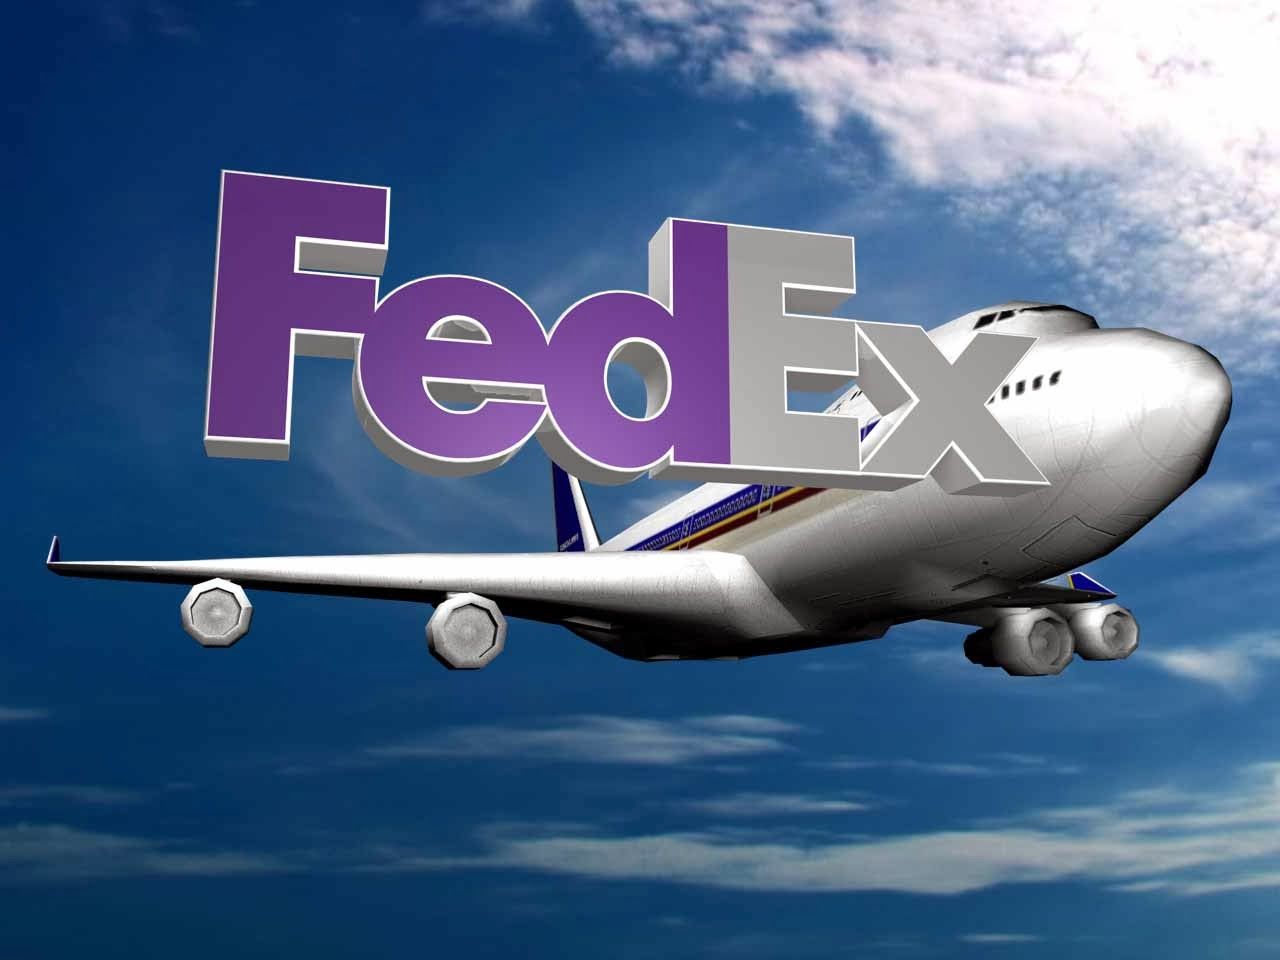 HD Wallpapers: Fedex Pictures.